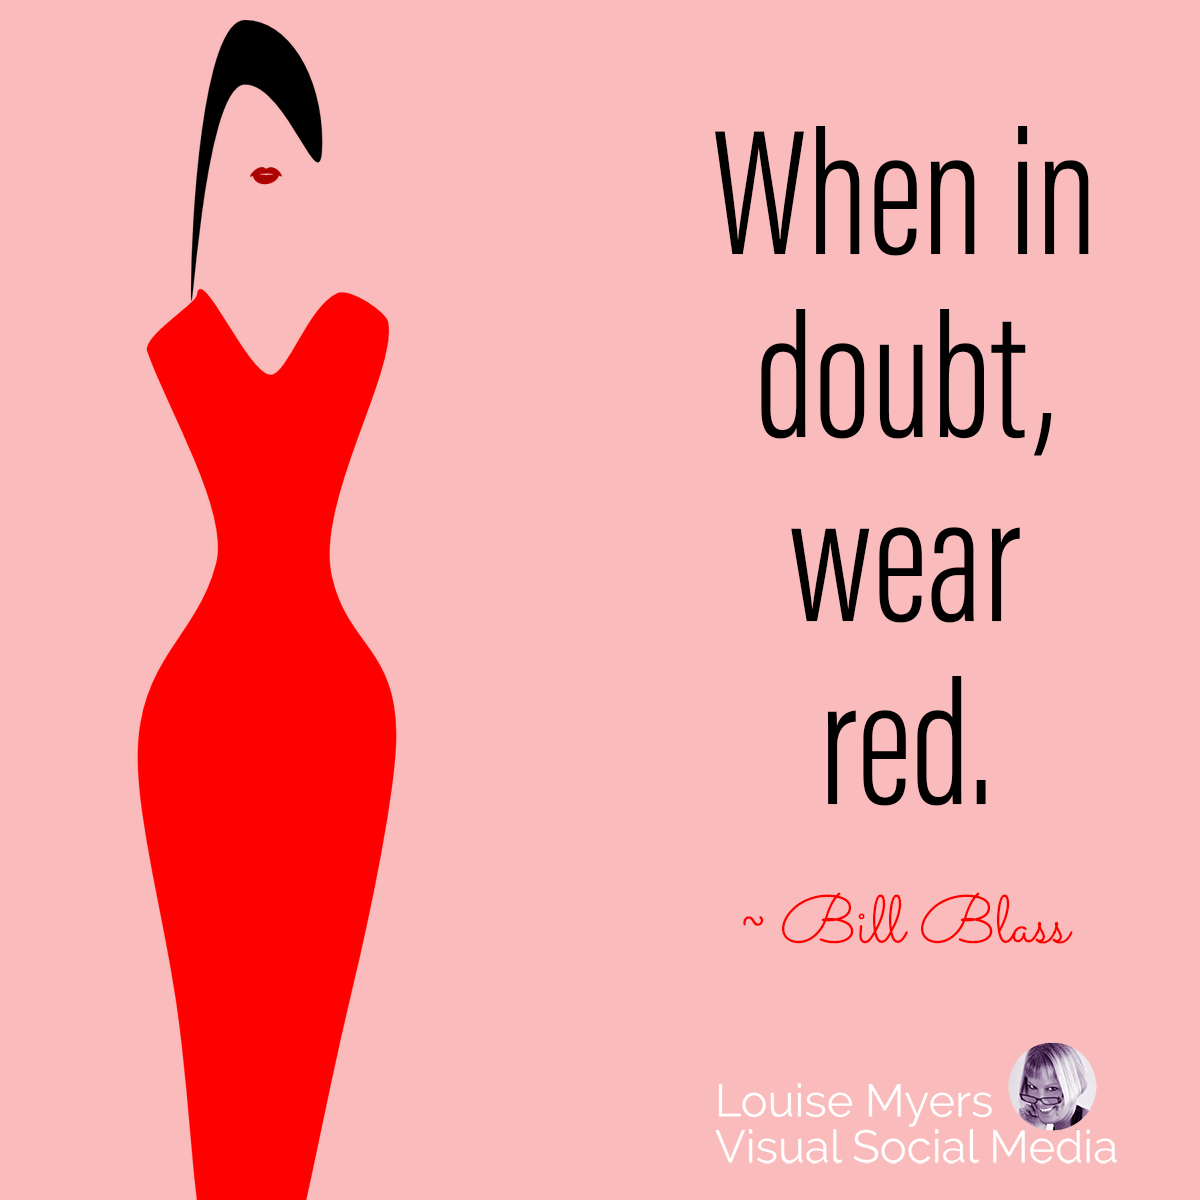 simple drawing of lady in red on pink graphics says When in doubt, wear red.